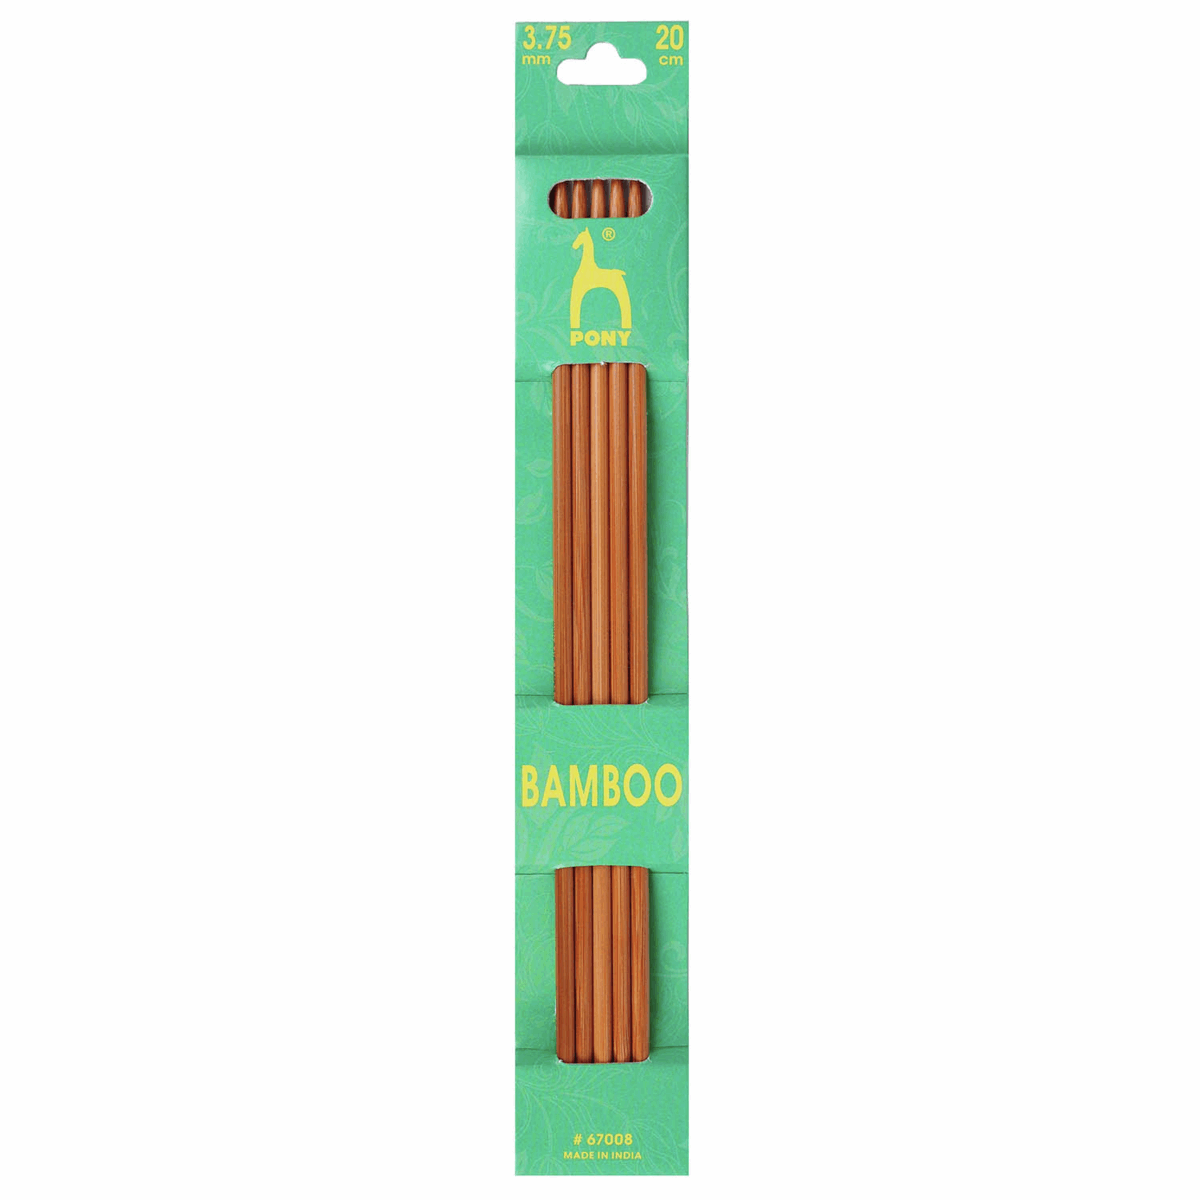 PONY Double-Ended Bamboo Knitting Pins - 20cm x 3.75mm (Set of 5)